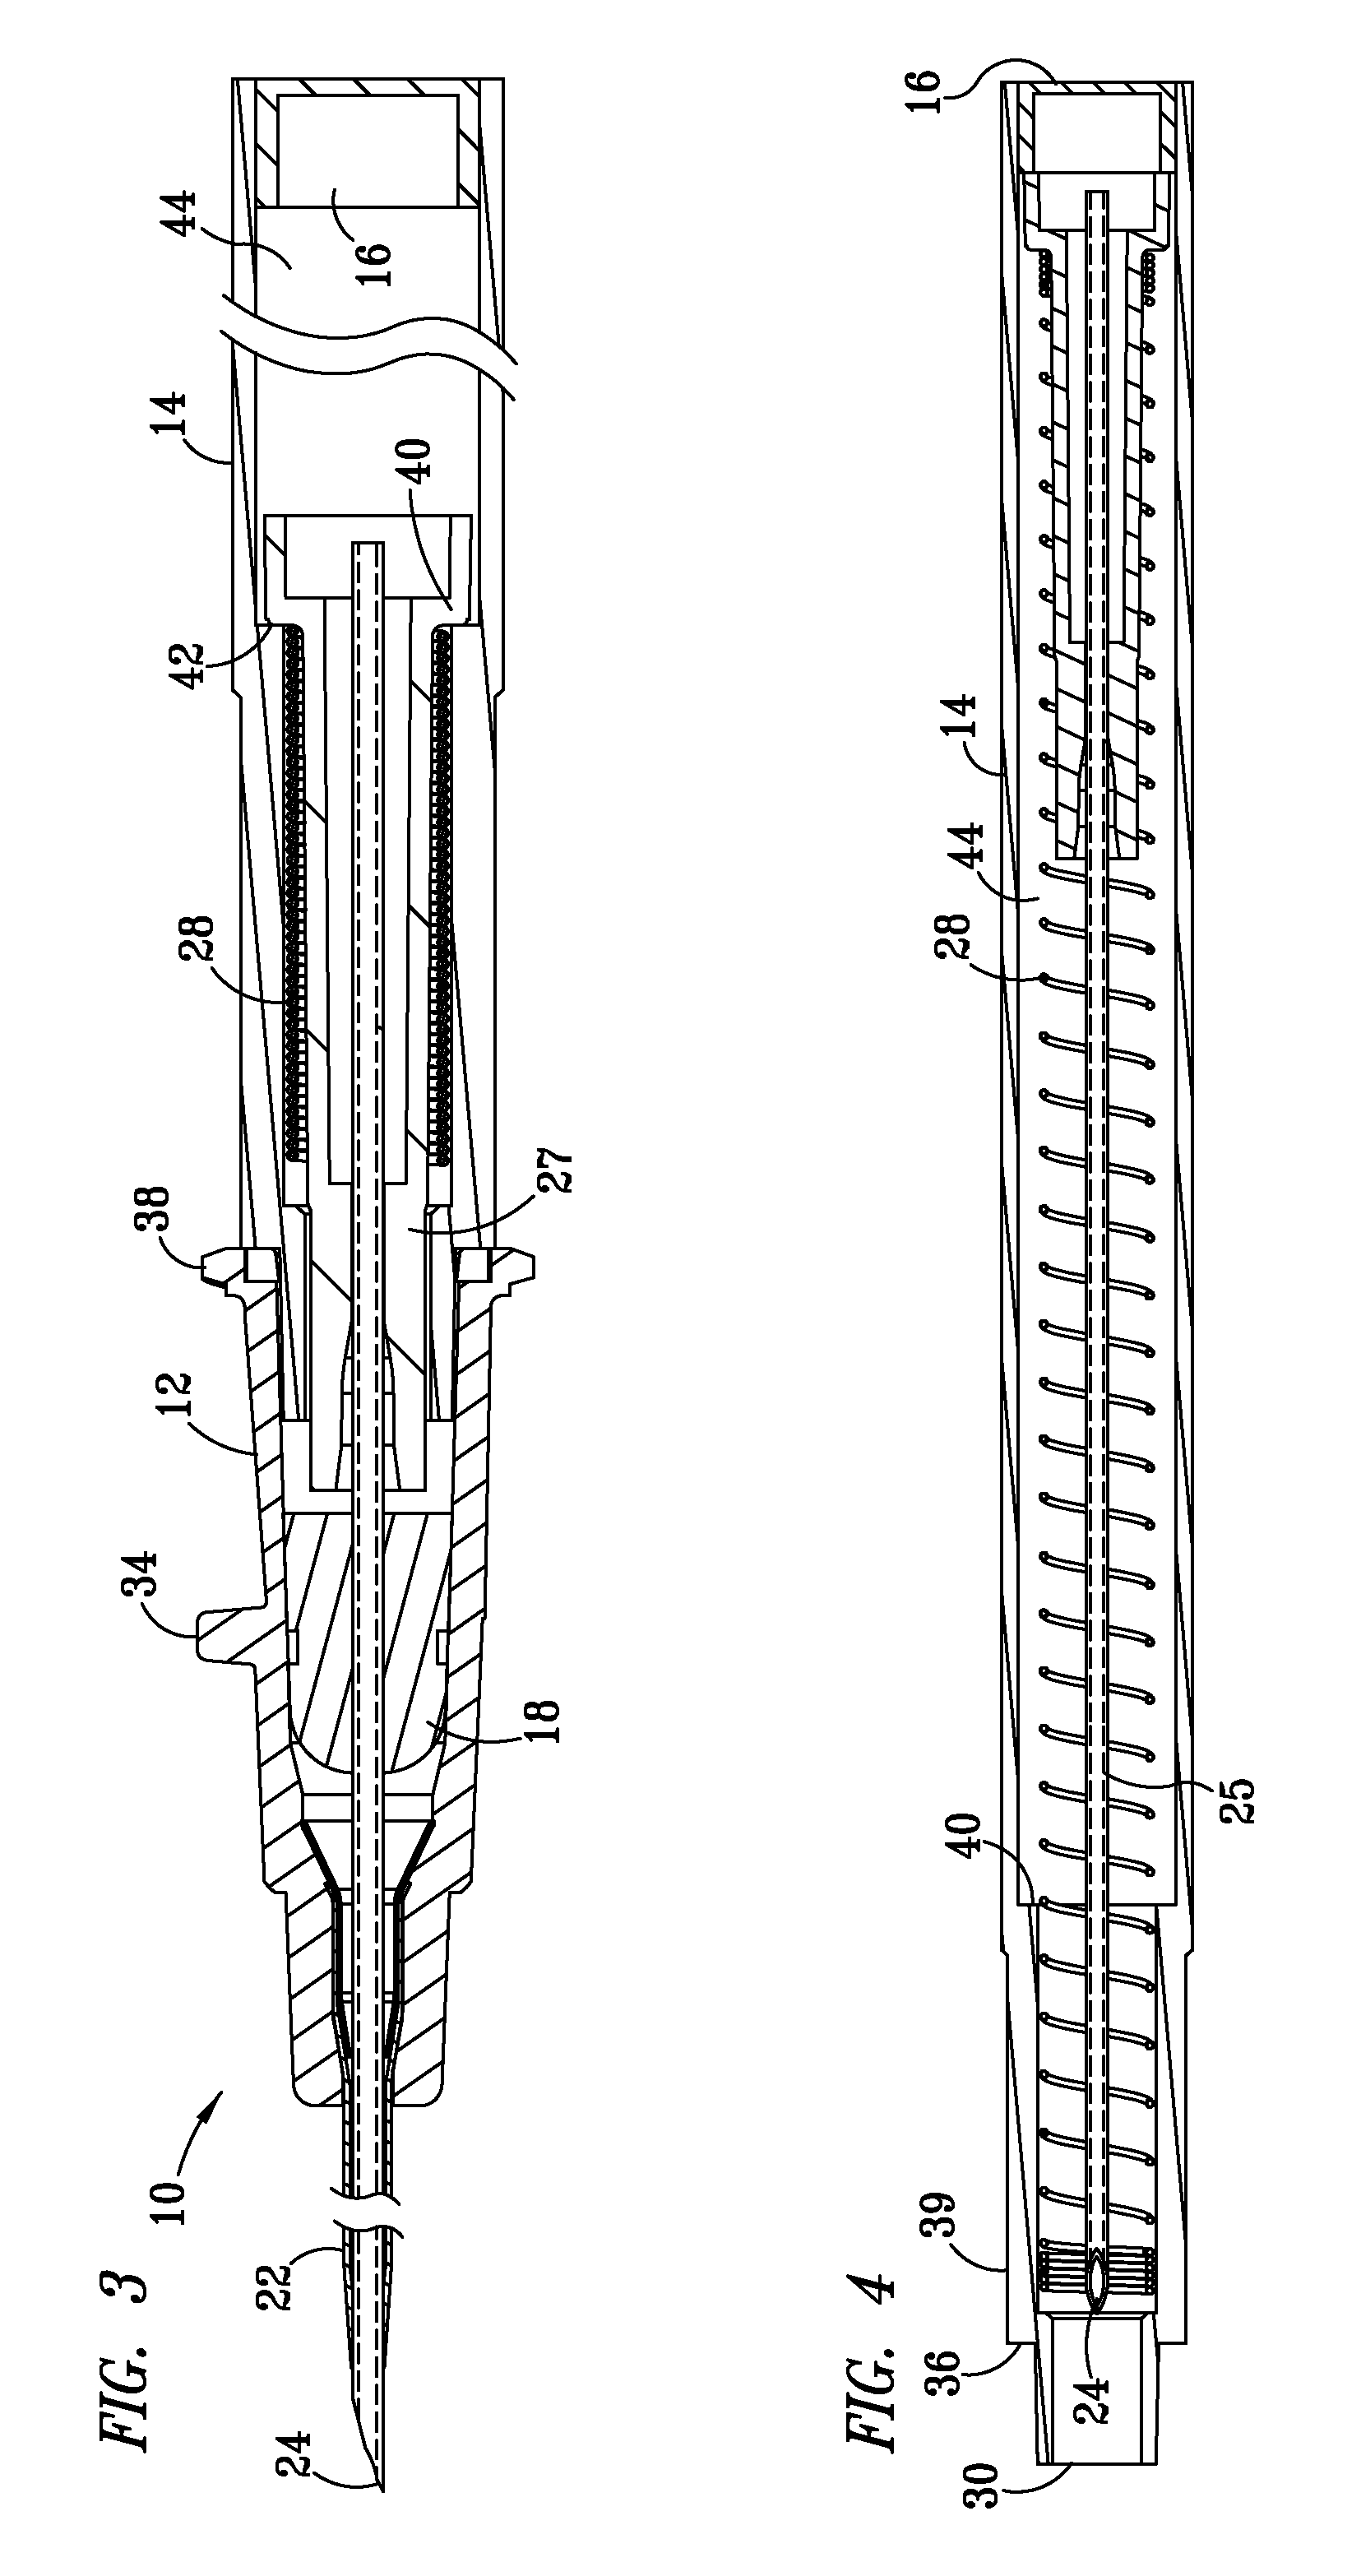 Intravenous Catheter Introducer with Needle Retraction Controlled by Catheter Hub Seal